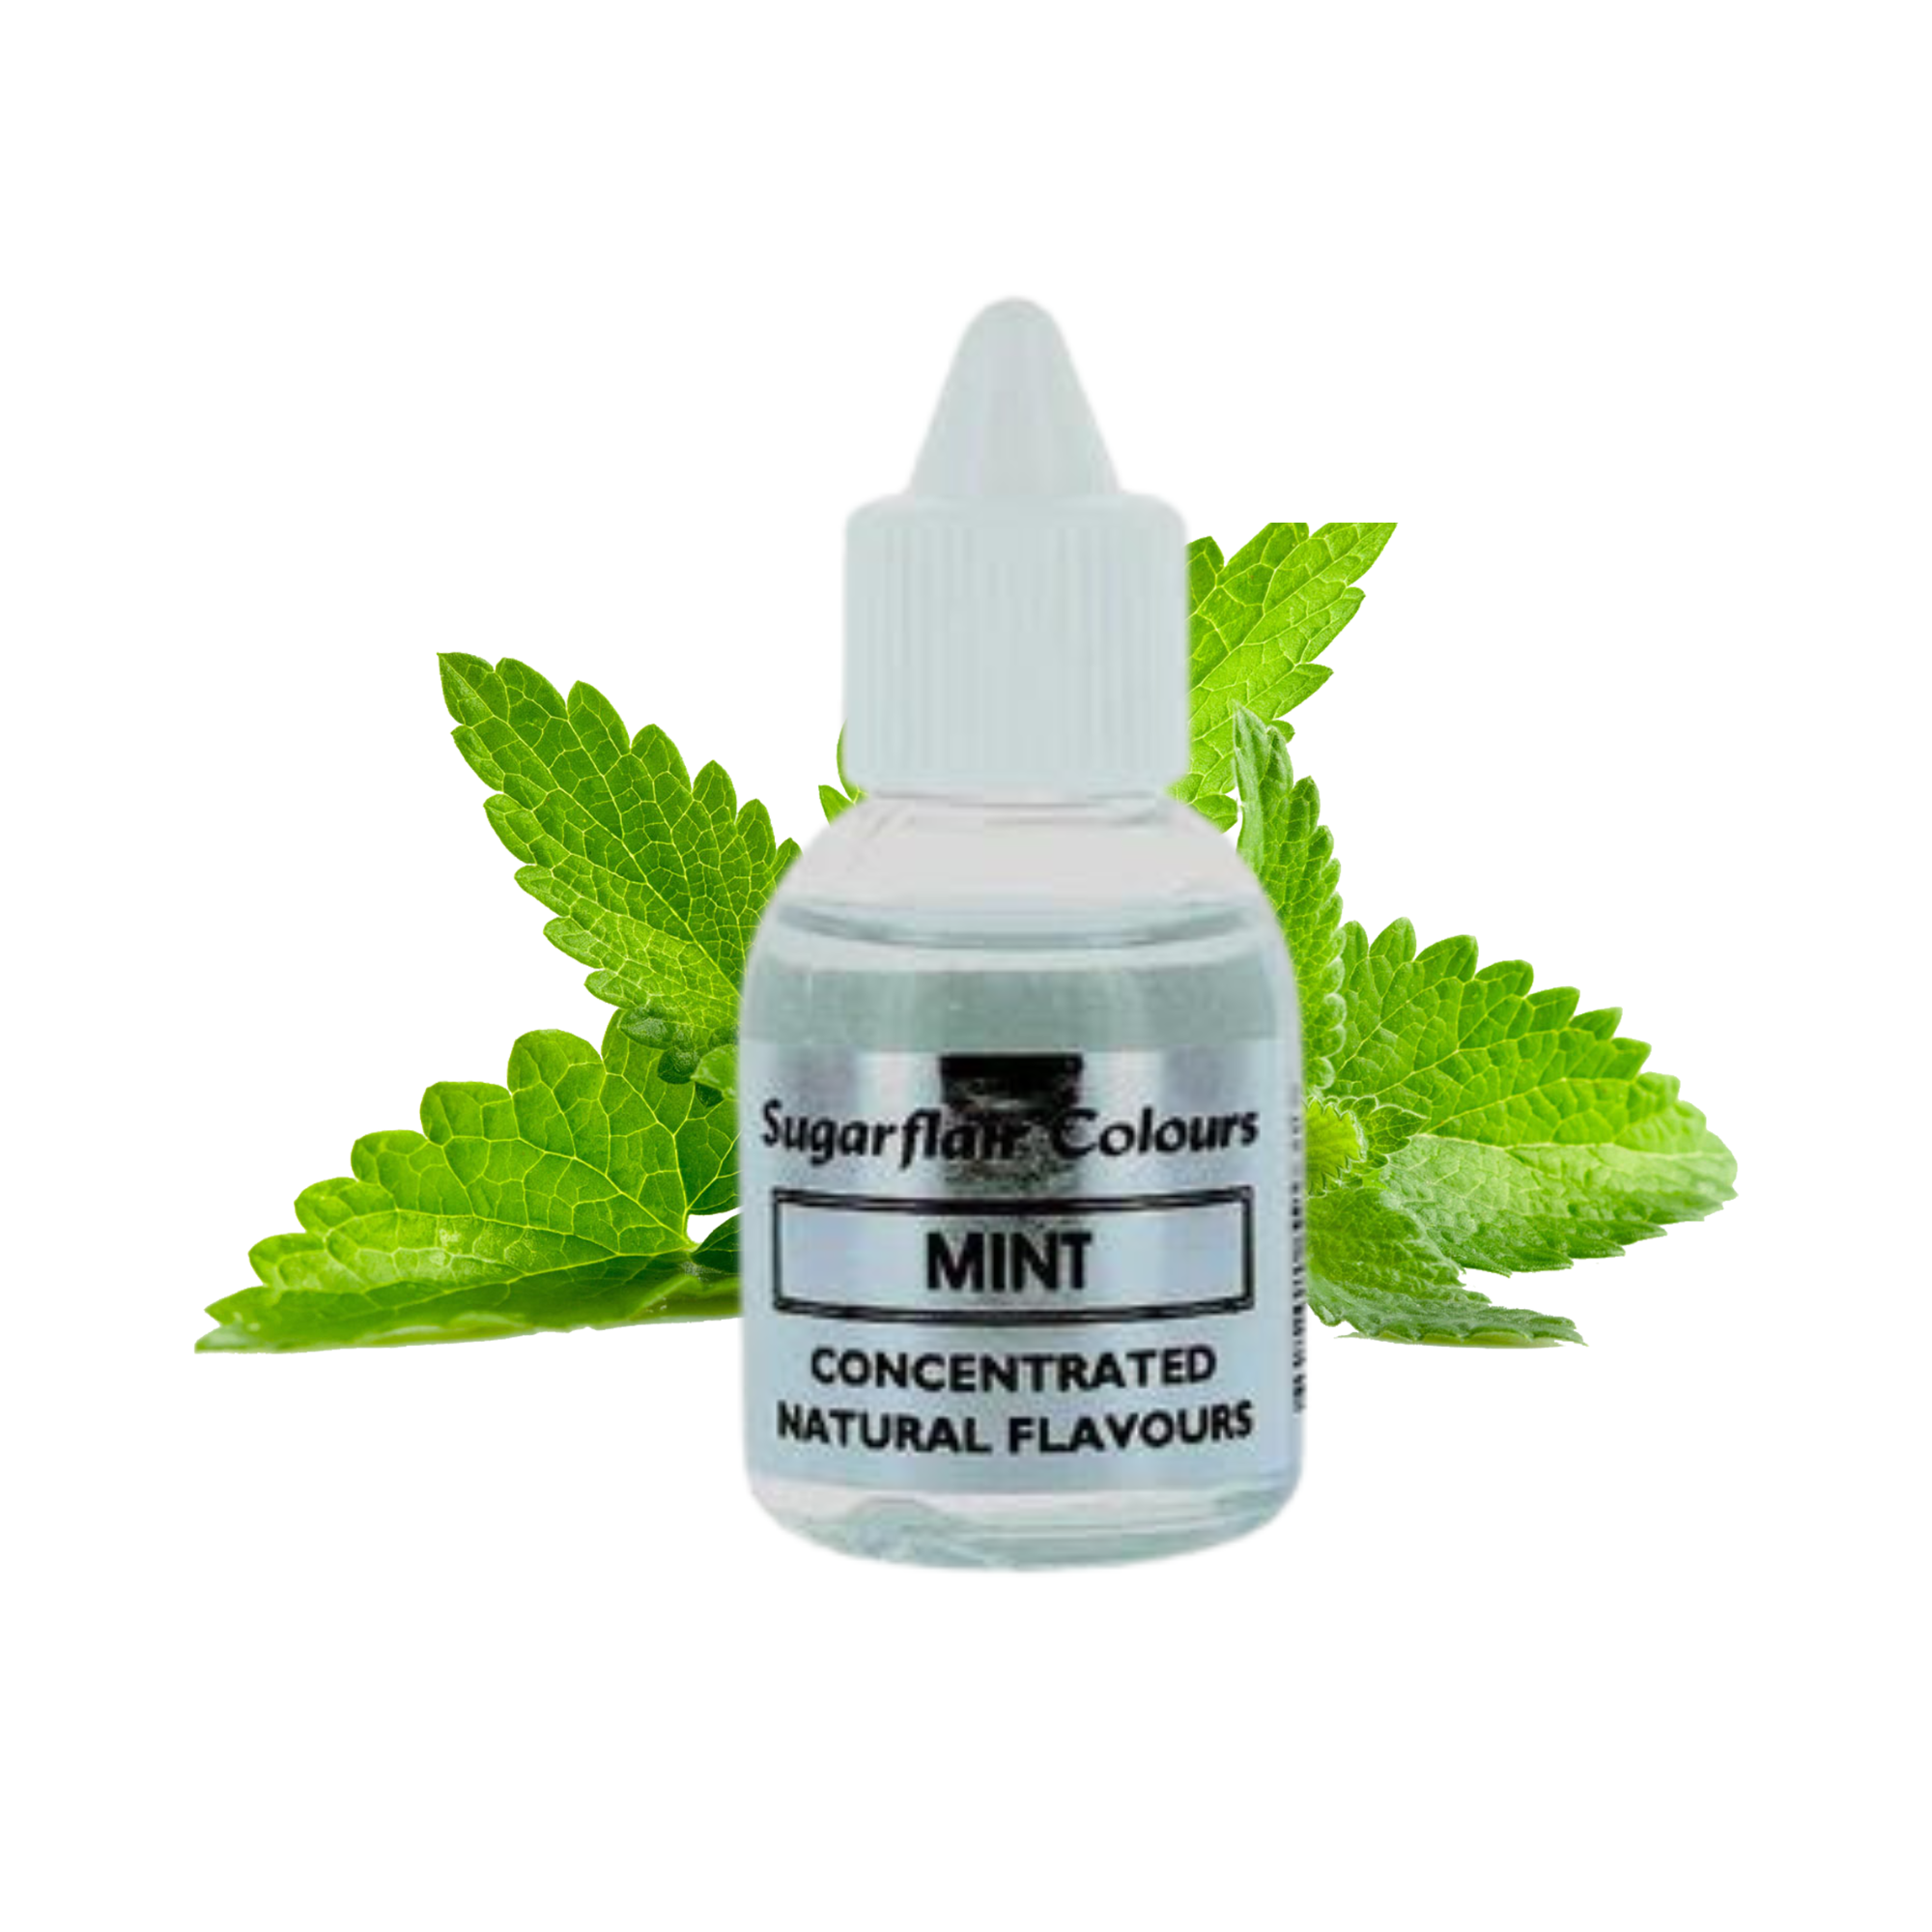 Sugarflair Mint - Concentrated Natural Flavour / Food Flavouring 30ml